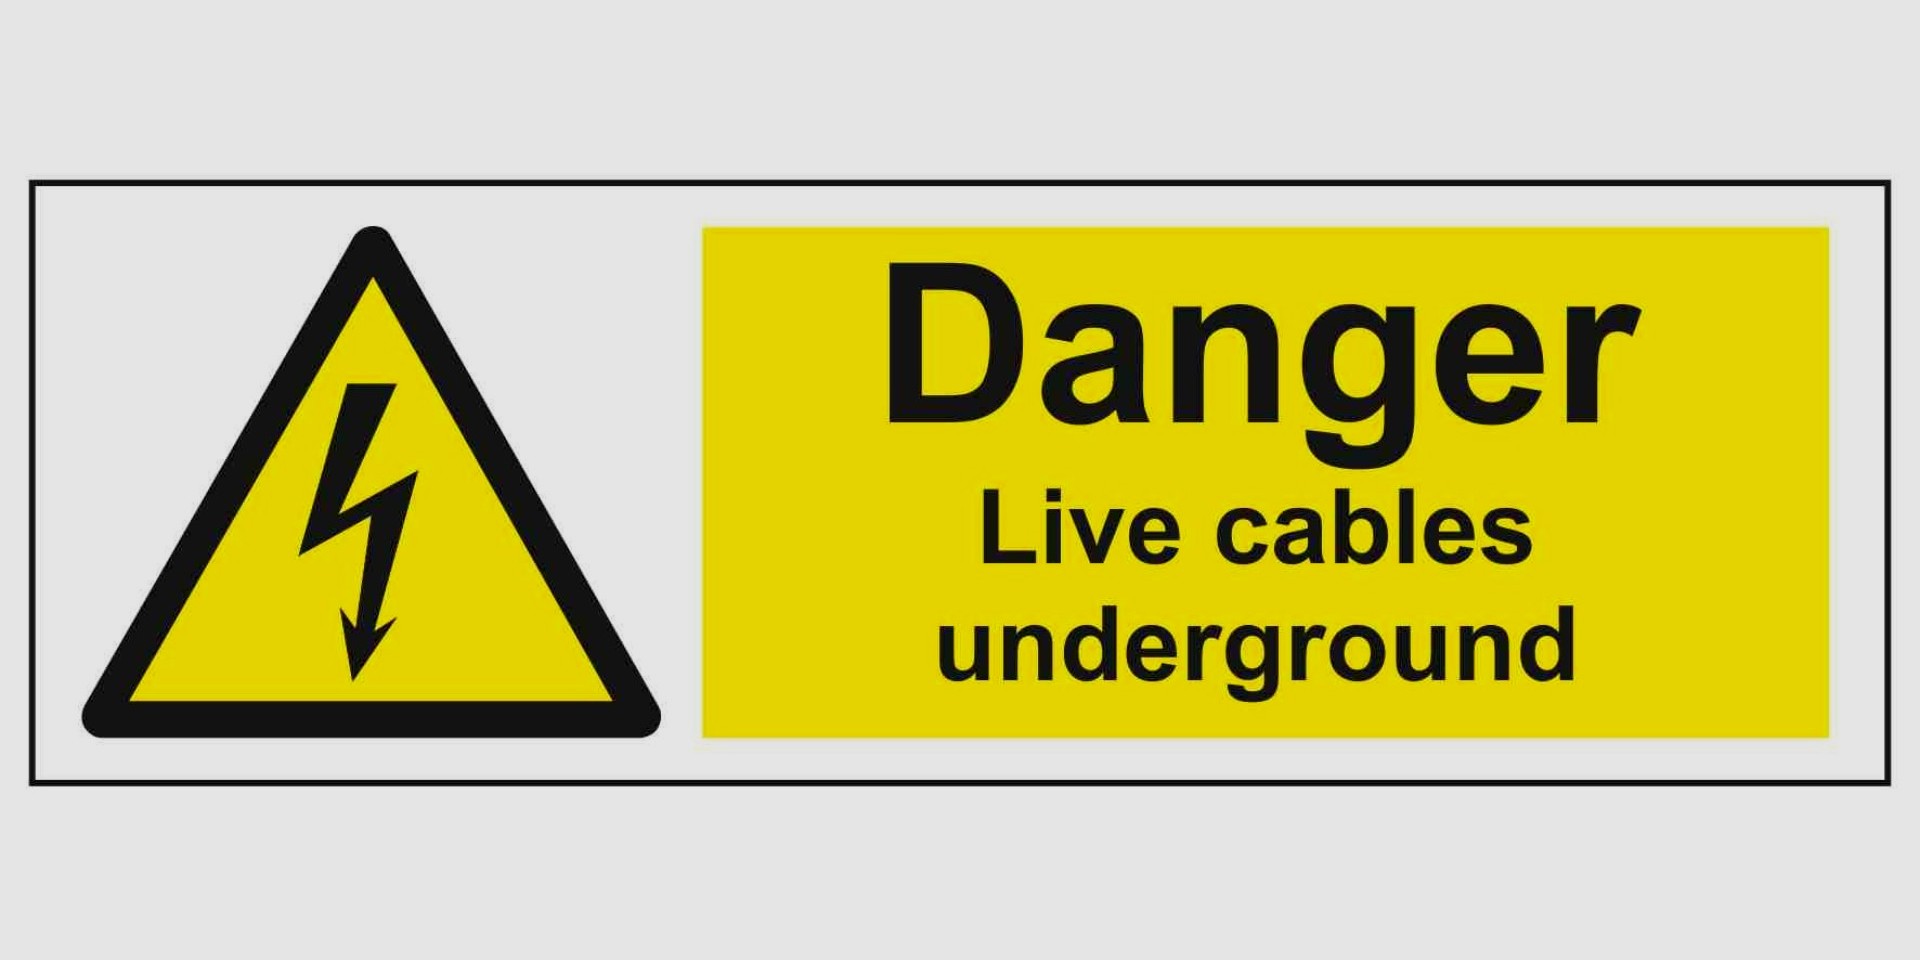 How do you know if a cable is buried live